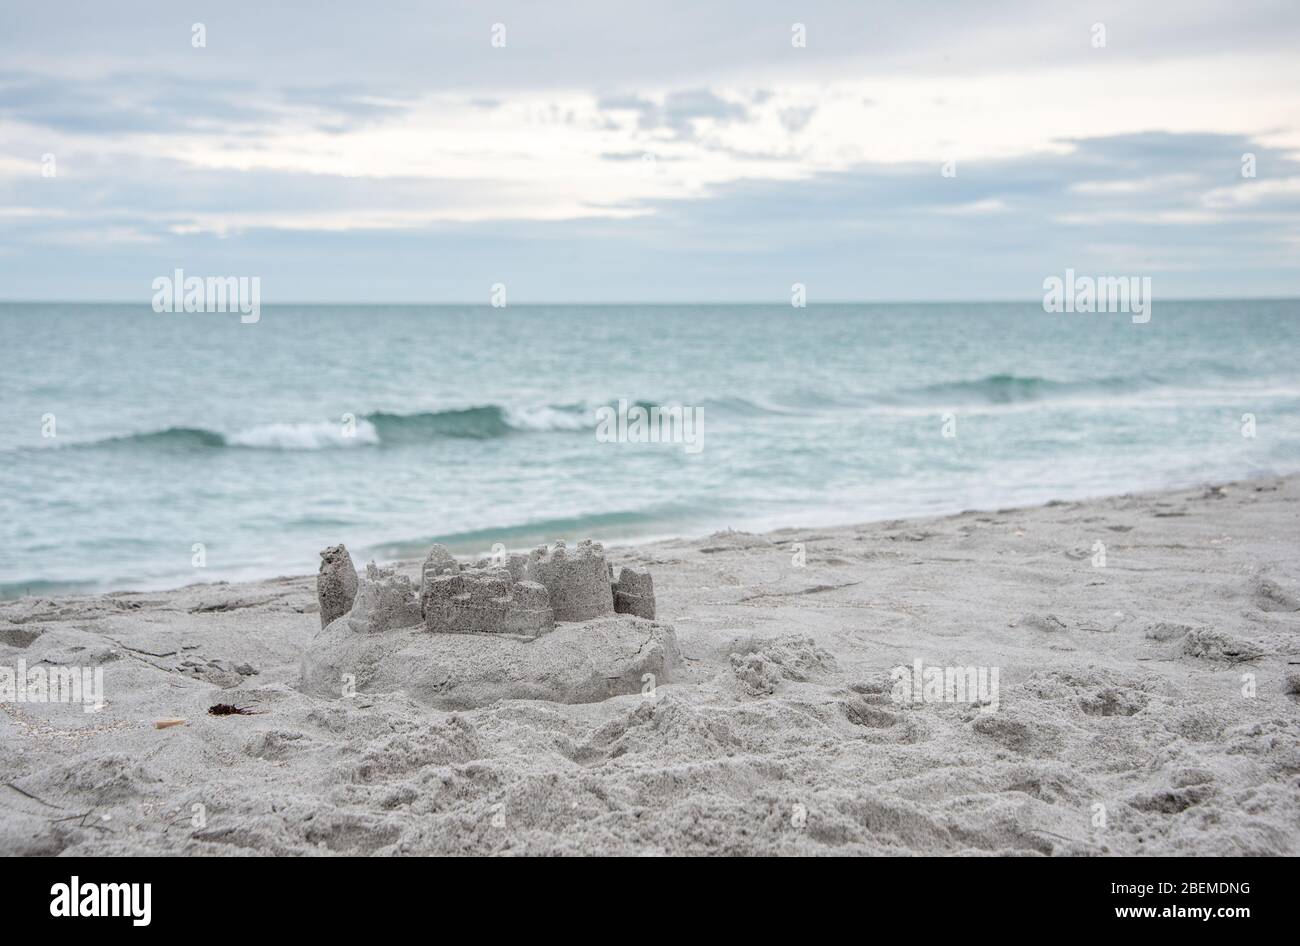 A sand castle on beach with gentle waves, a serene scene for a Florida family vacation / holiday in nature. Stock Photo